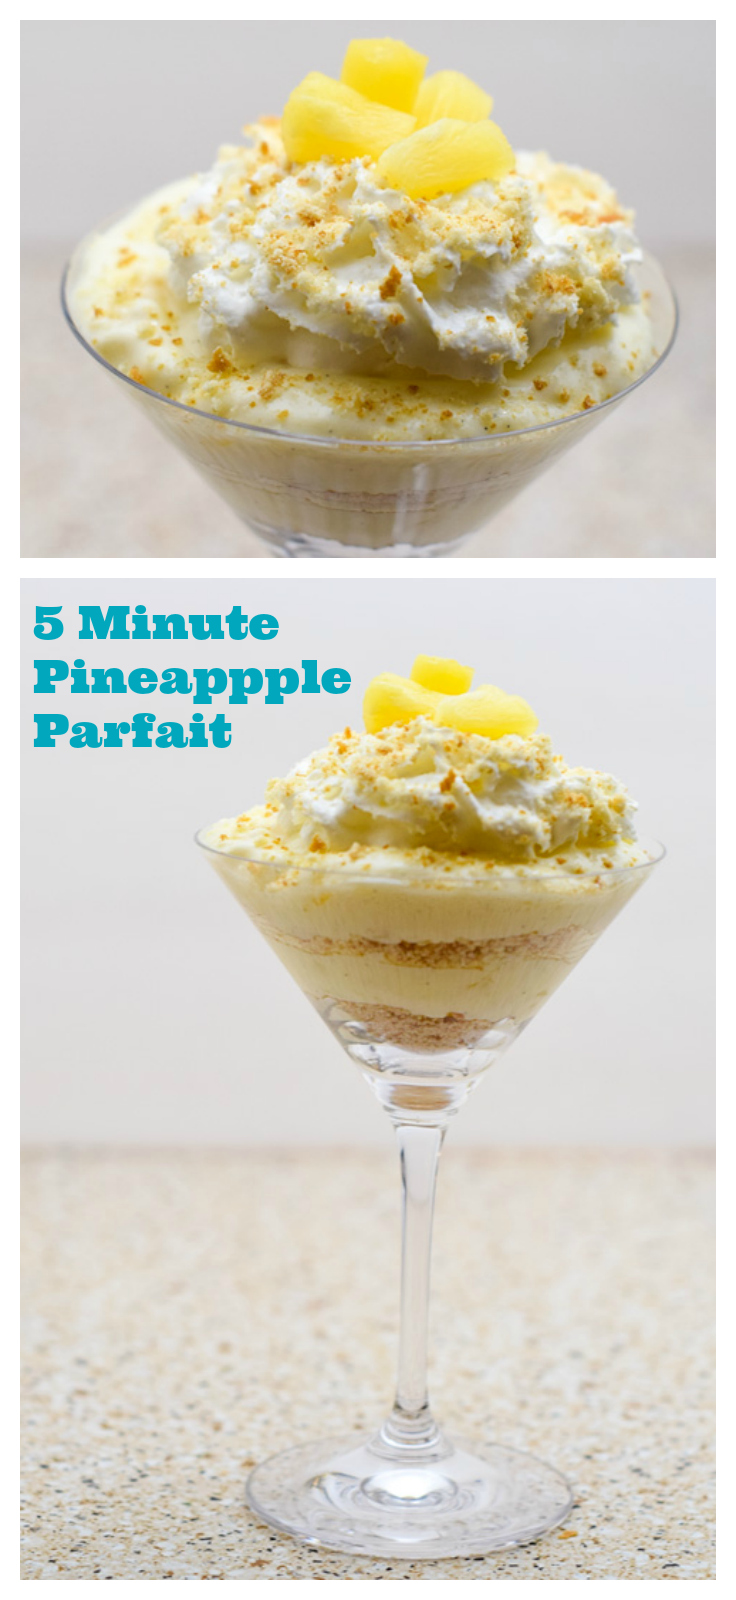 A quick and easy dessert featuring healthy yogurt, pineapple, and cookie crumbs. Don't have time to make a healthy dessert or any dessert? There are no excuses now! This pineapple parfait only takes 5 minutes to make! Now that's a quick dessert! The recipe also comes with a free "Do Not Disturb / Pampering In Progress" door knob hanger so you can eat your dessert in peace! #MullerMoment #CollectiveBias #ad #pineapple #quick #easy #desserts #yogurt